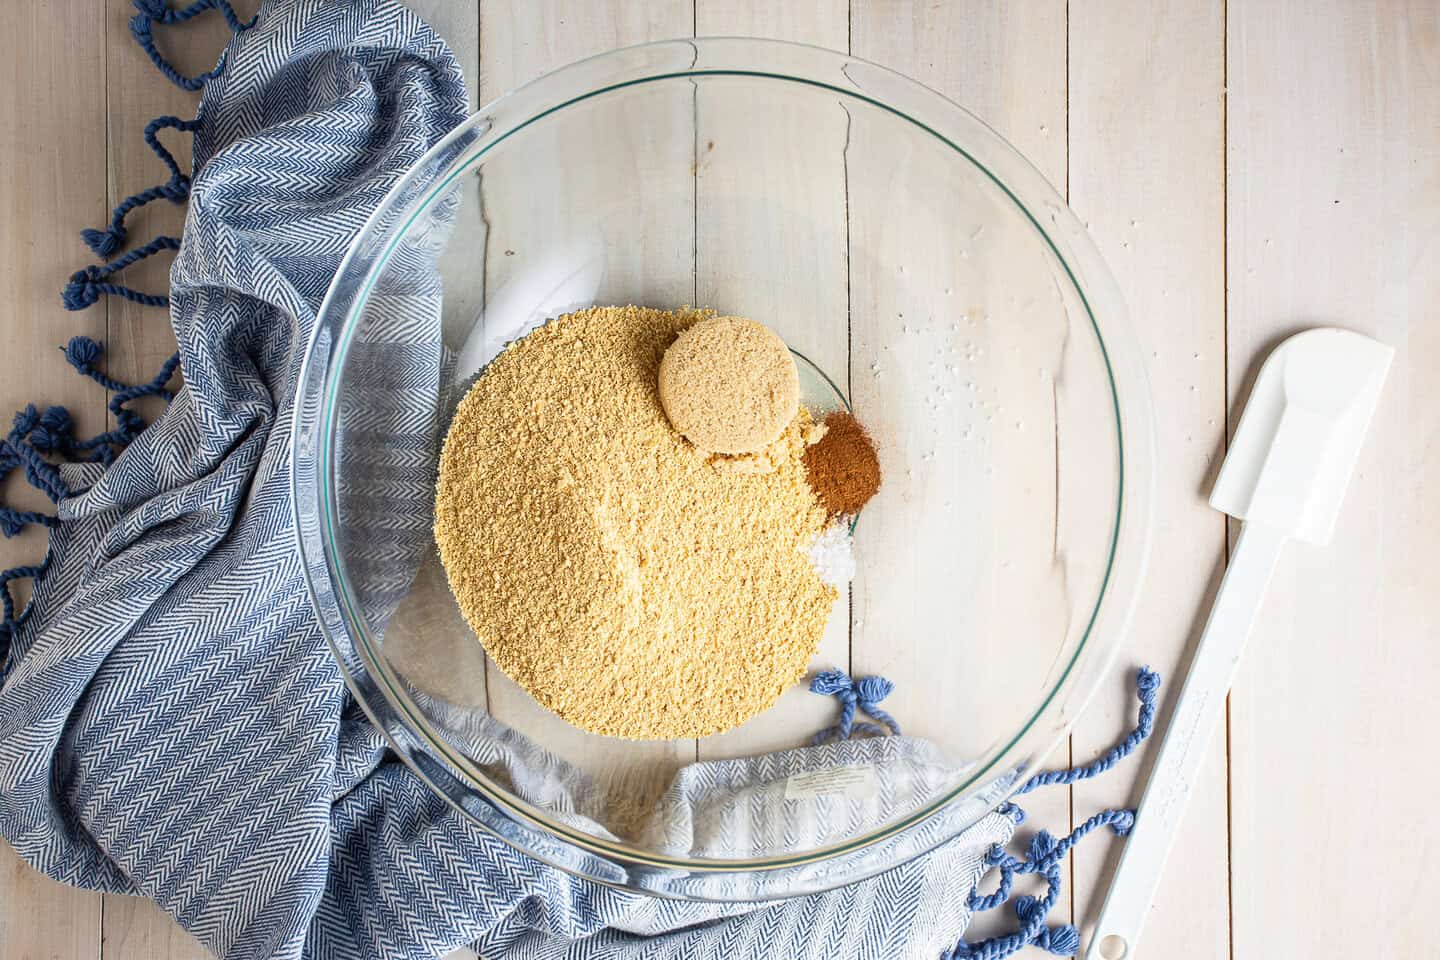 Graham cracker crumbs, brown sugar, cinnamon, and salt in a large glass mixing bowl.